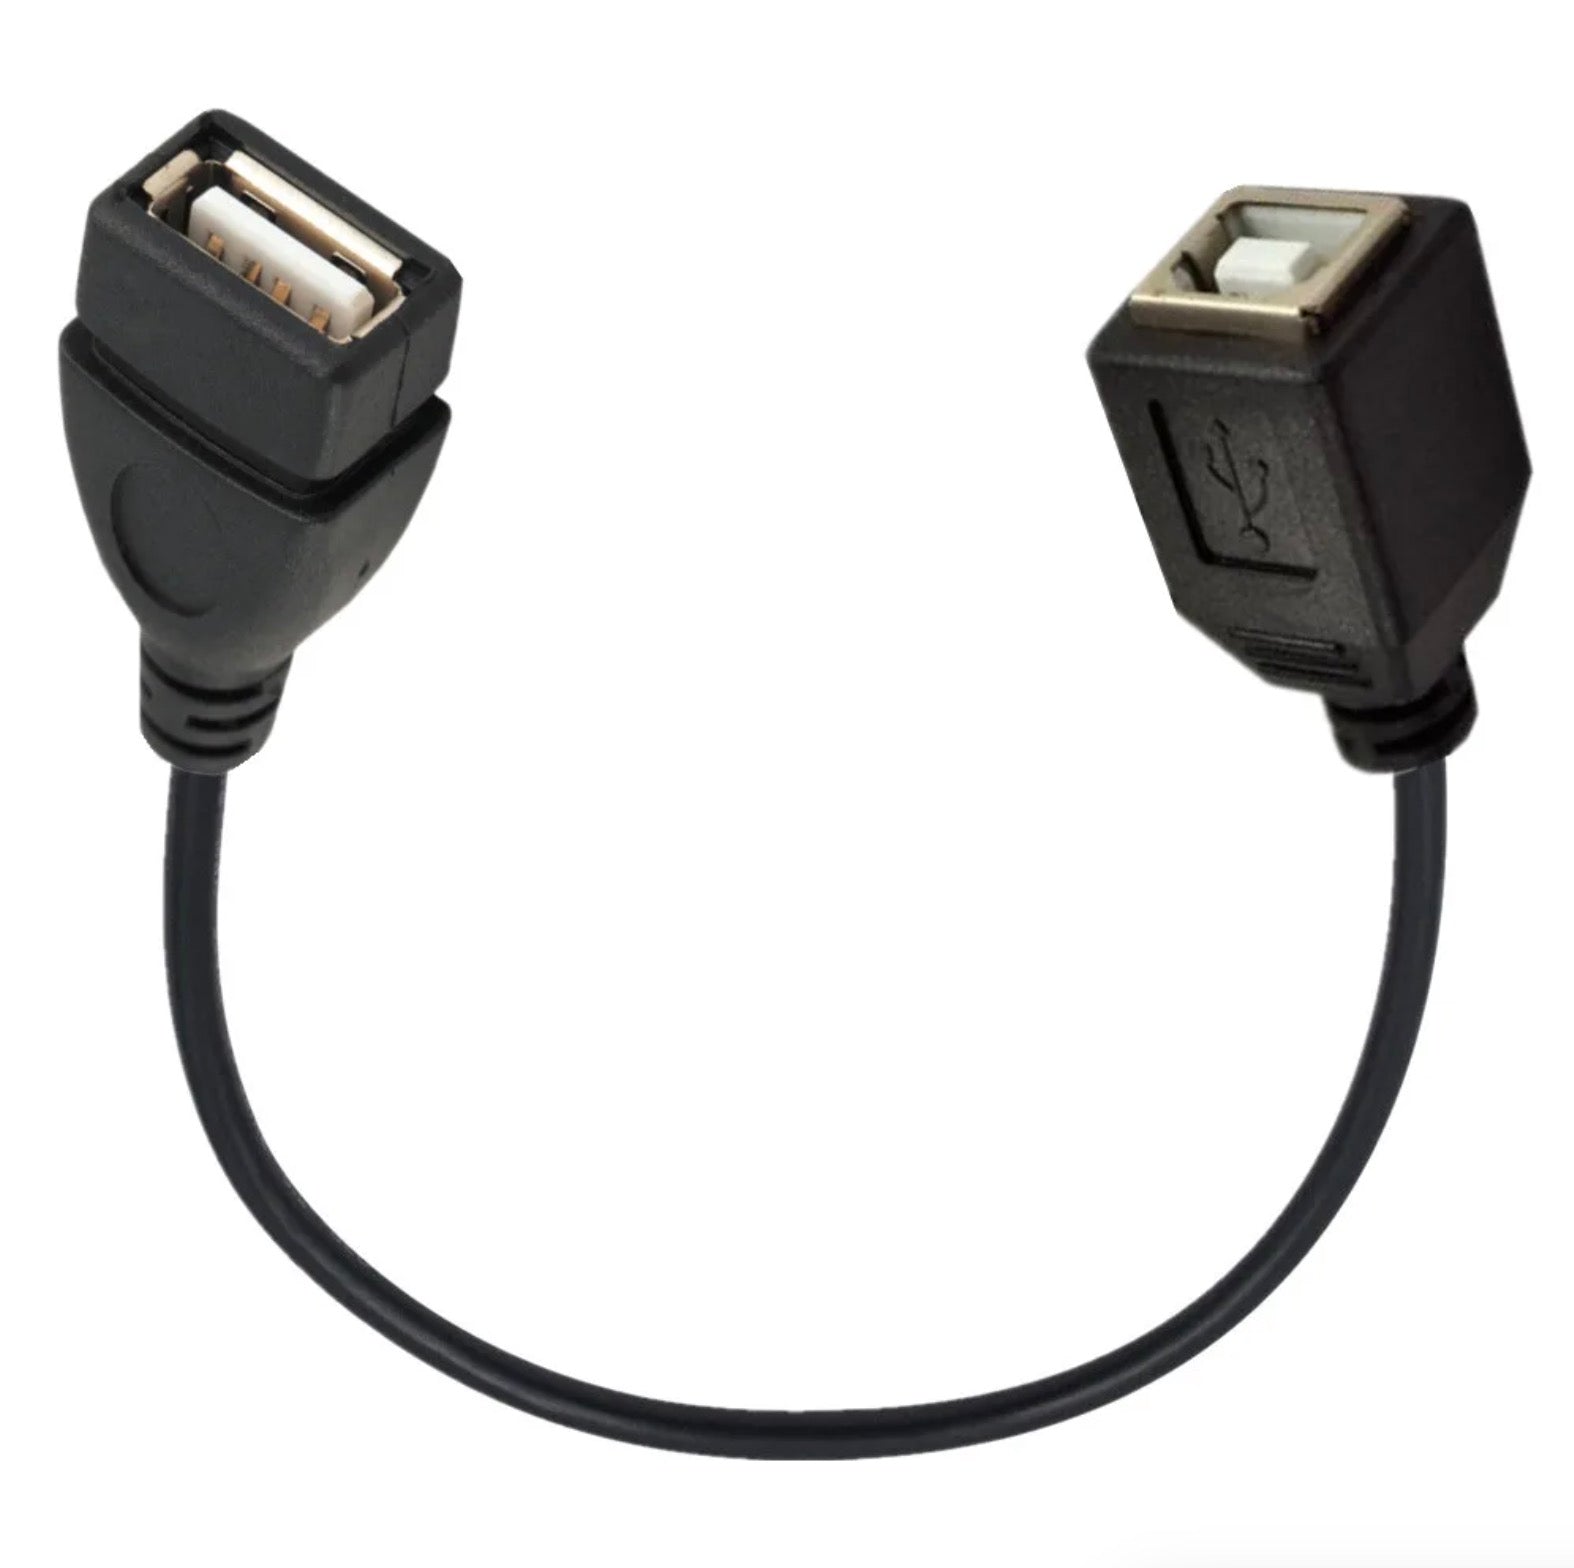 USB 2.0 B Female to USB A Female Printer Extension Cable 0.5m